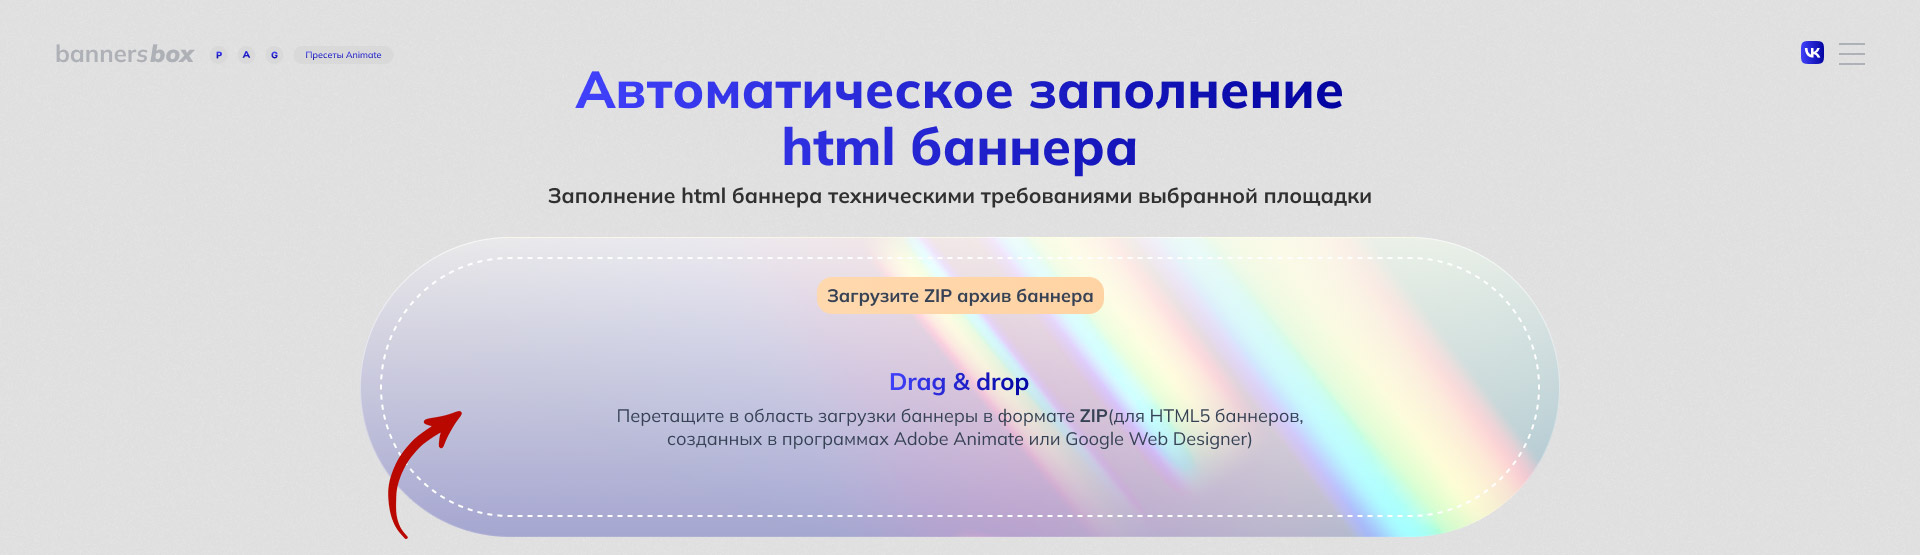 Screenshot of the Drag & Drop field for uploading HTML banners to automatically populate technical requirements.